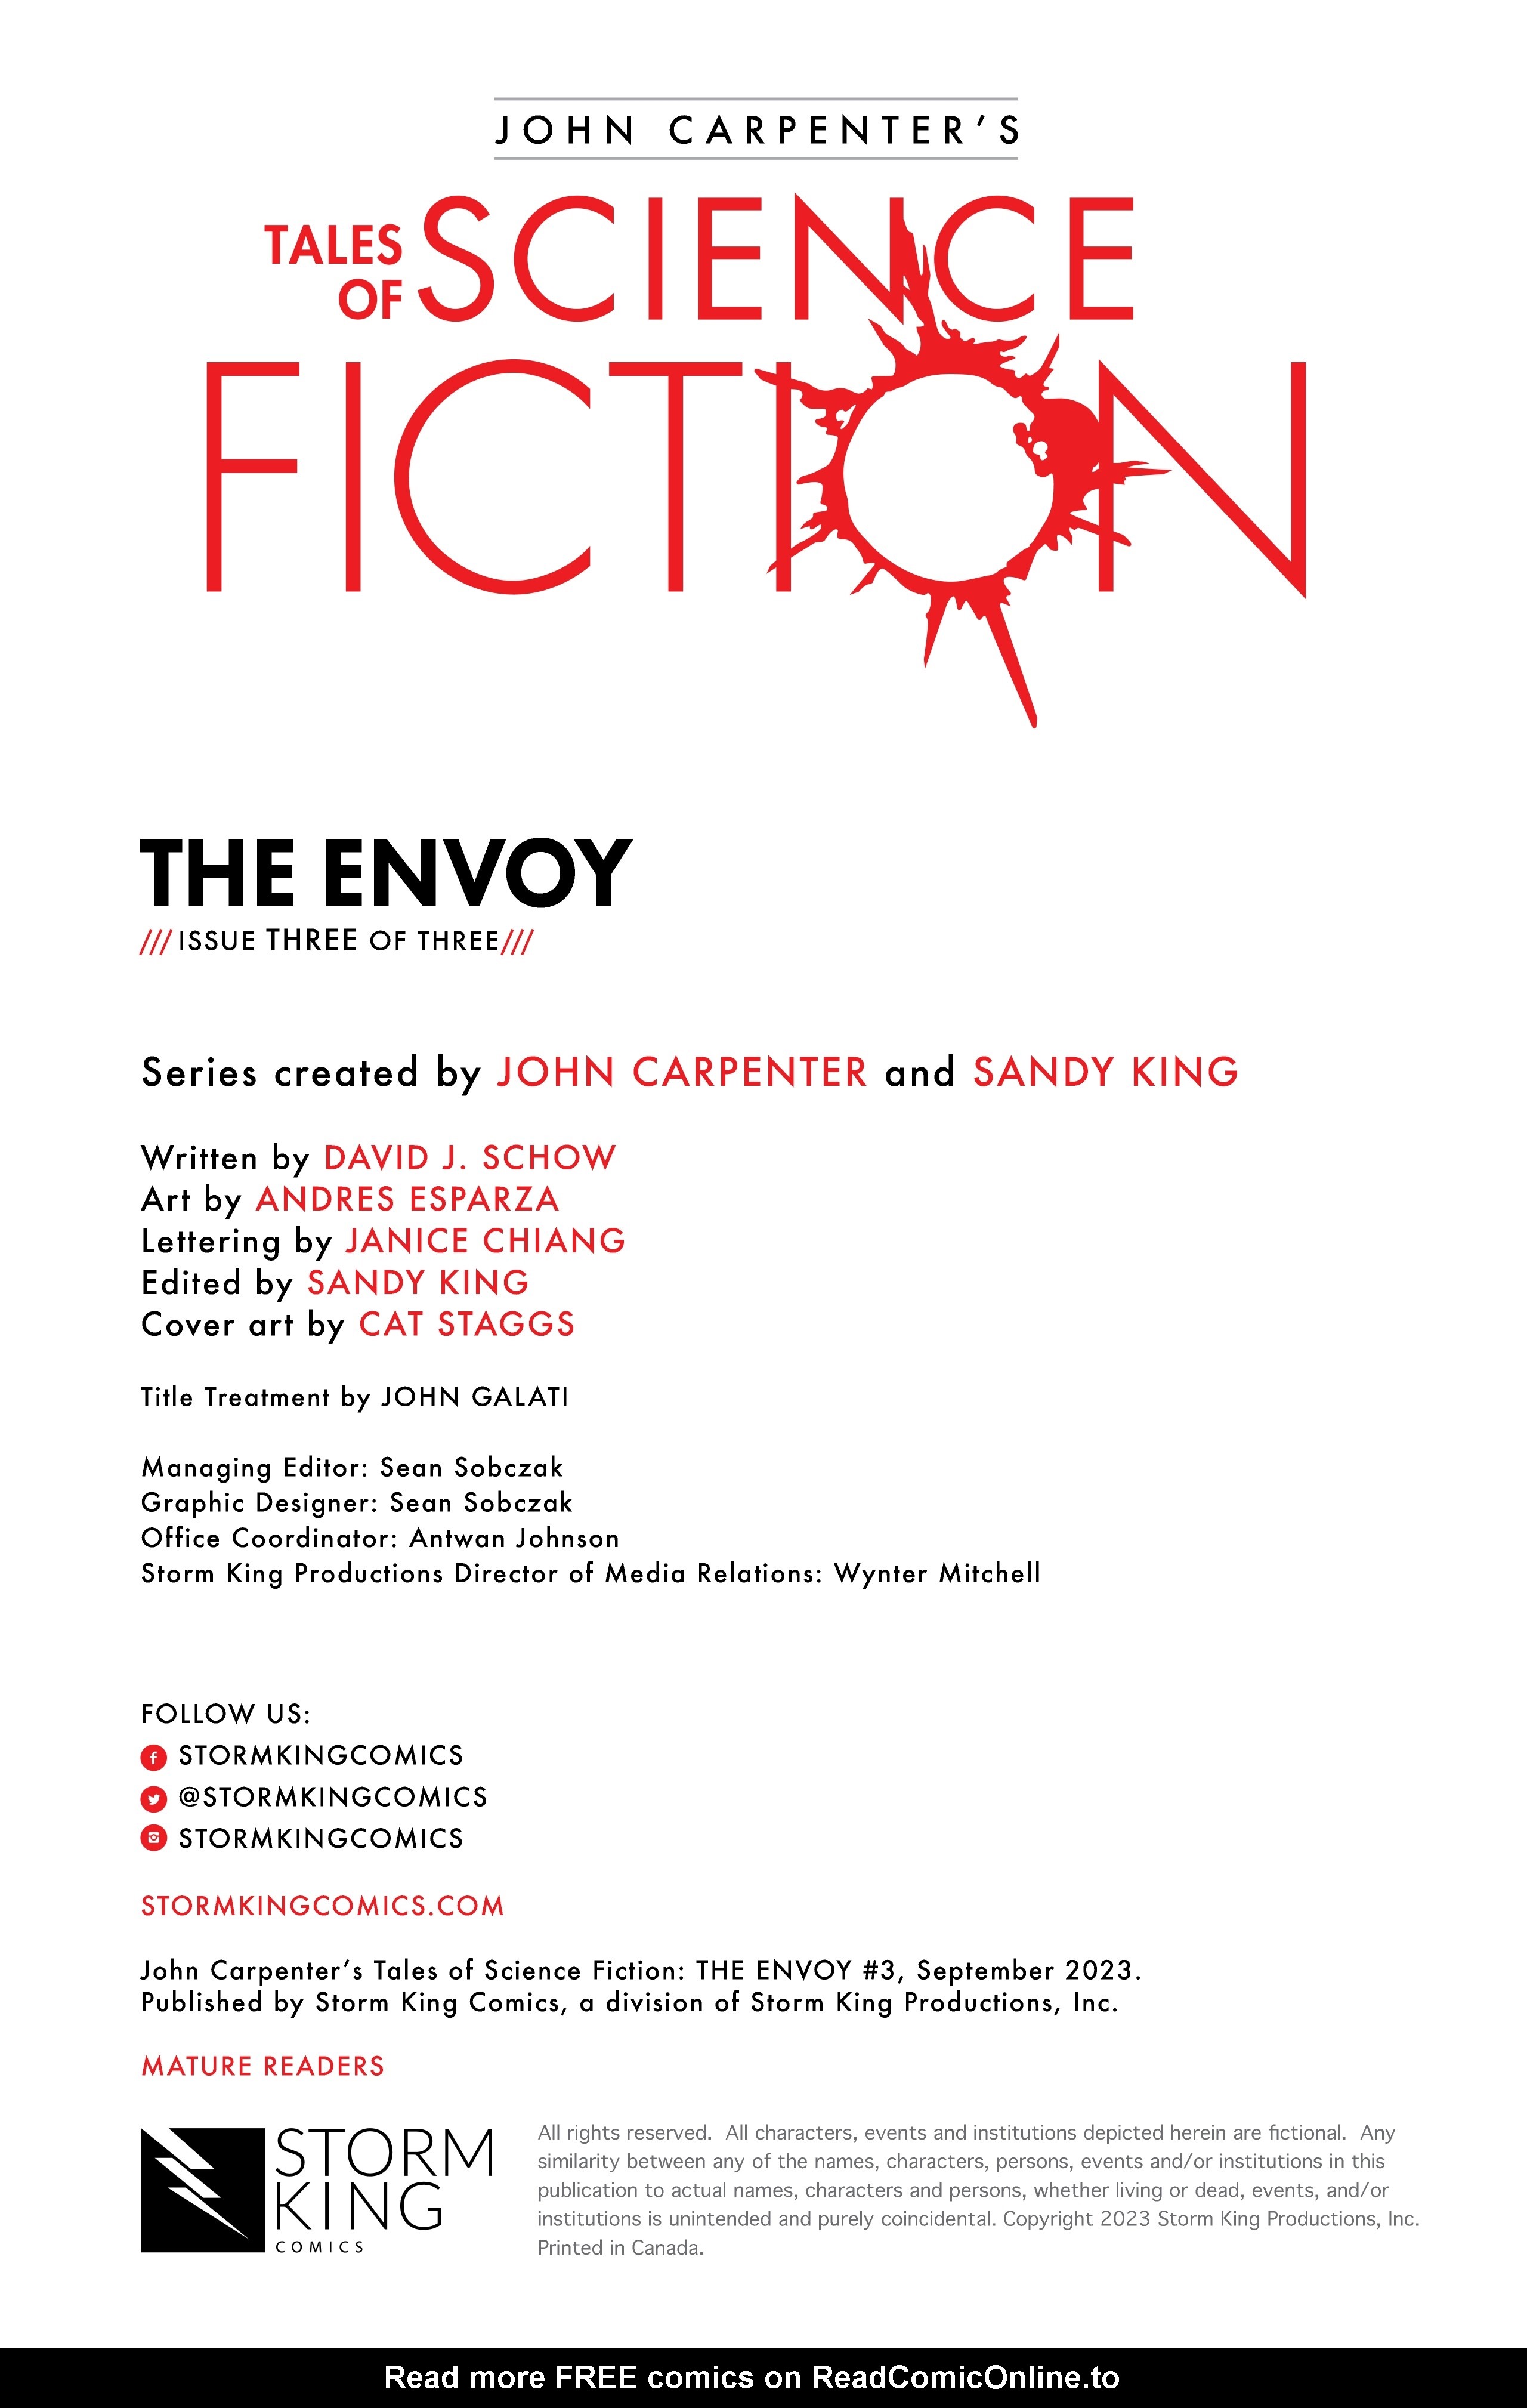 Read online John Carpenter's Tales of Science Fiction: The Envoy comic -  Issue #3 - 2